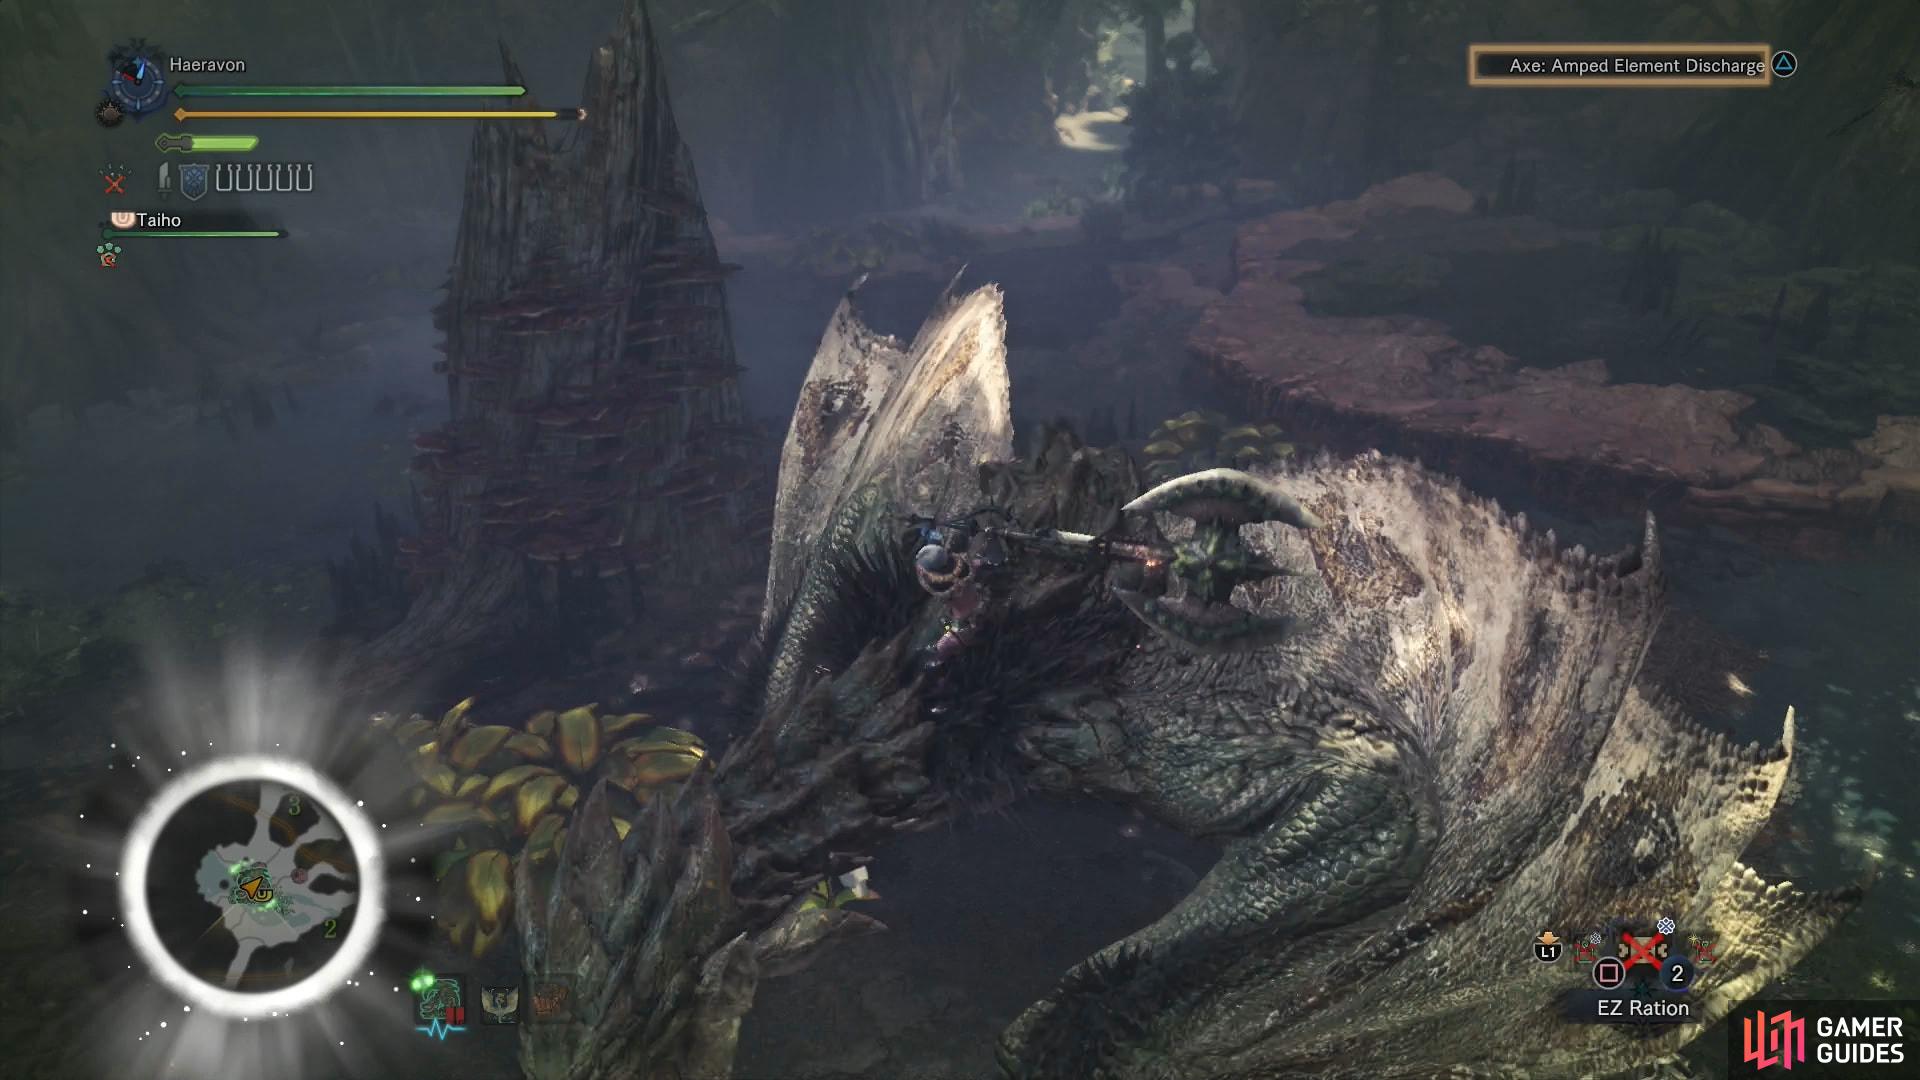 The Rathian tends to occupy areas with uneven terrain. Use it to your advantage to mount the beast and deliver a telling blow